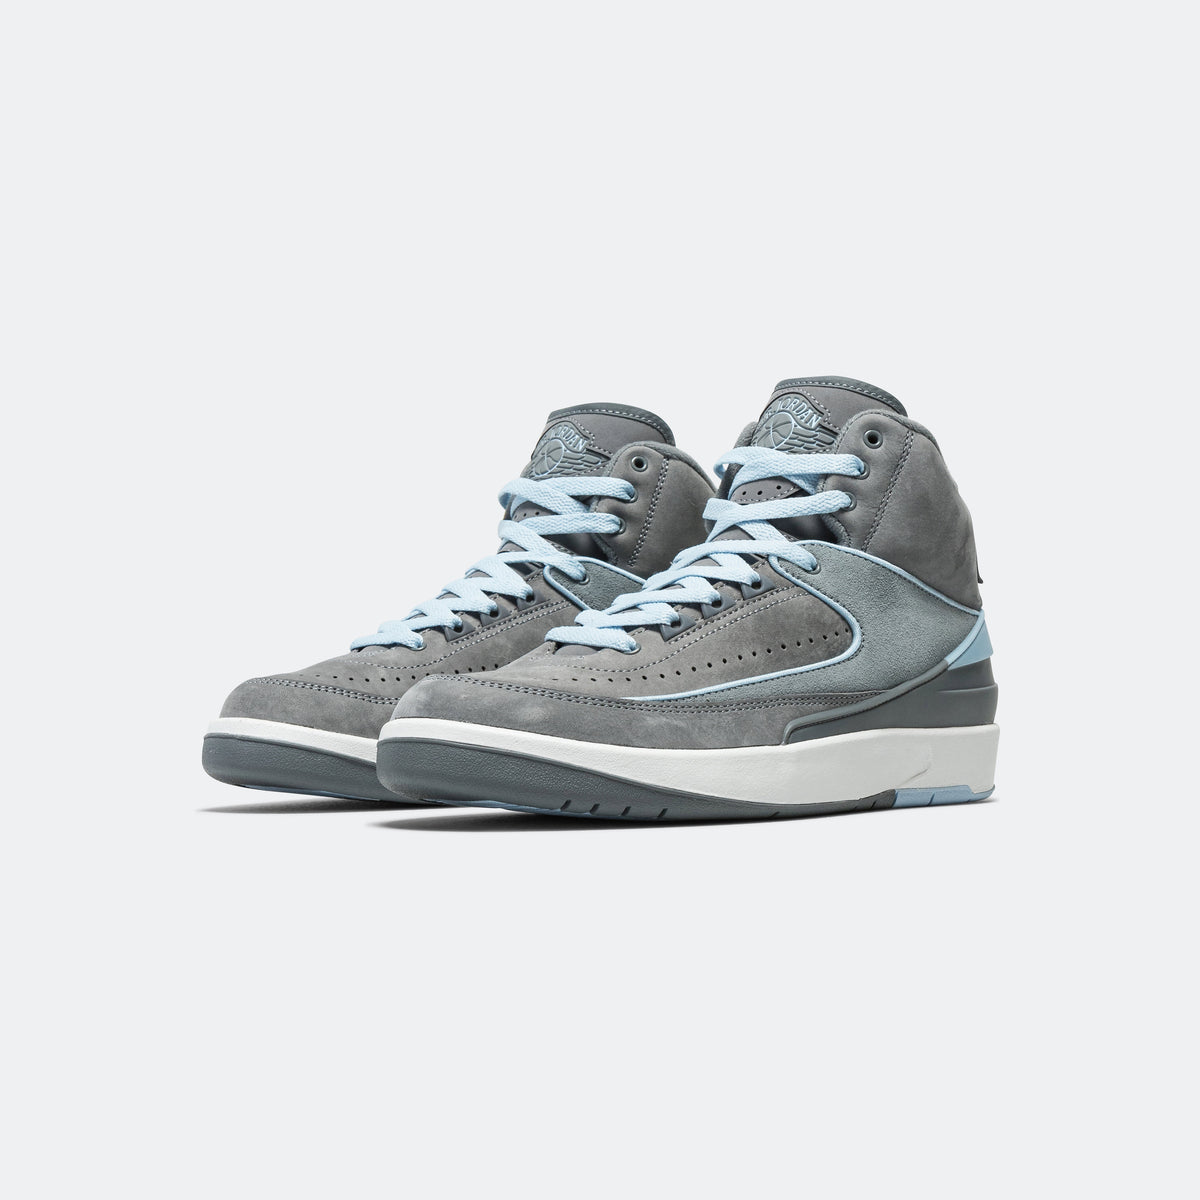 Nike Womens Air Jordan 2 - Cool Grey/Ice Blue-White | Up There | UP THERE